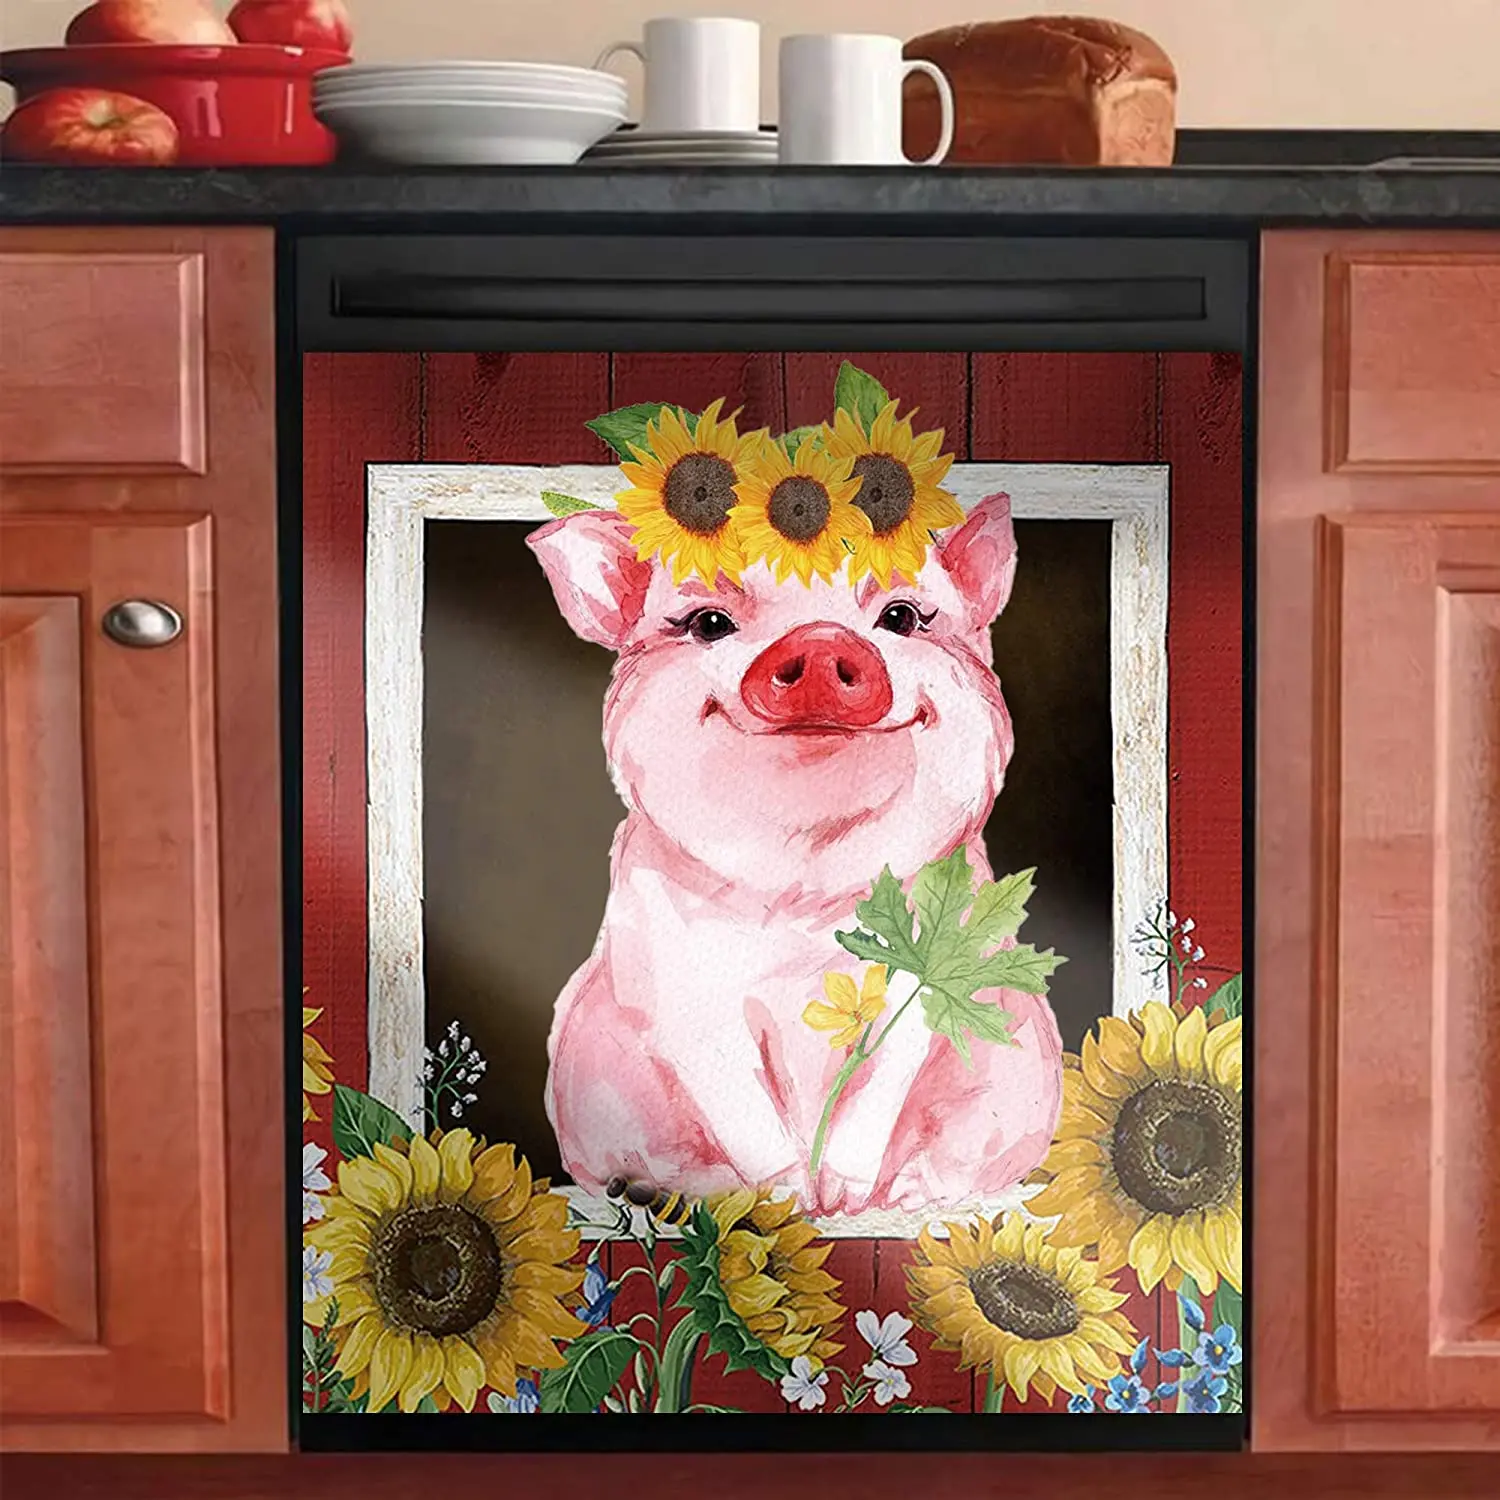 

MLGB Dishwasher Magnet Cover Decorative Pig and Sunflower with Red Barn Dishwasher Covers for The Front Magnetic Dishwasher Door